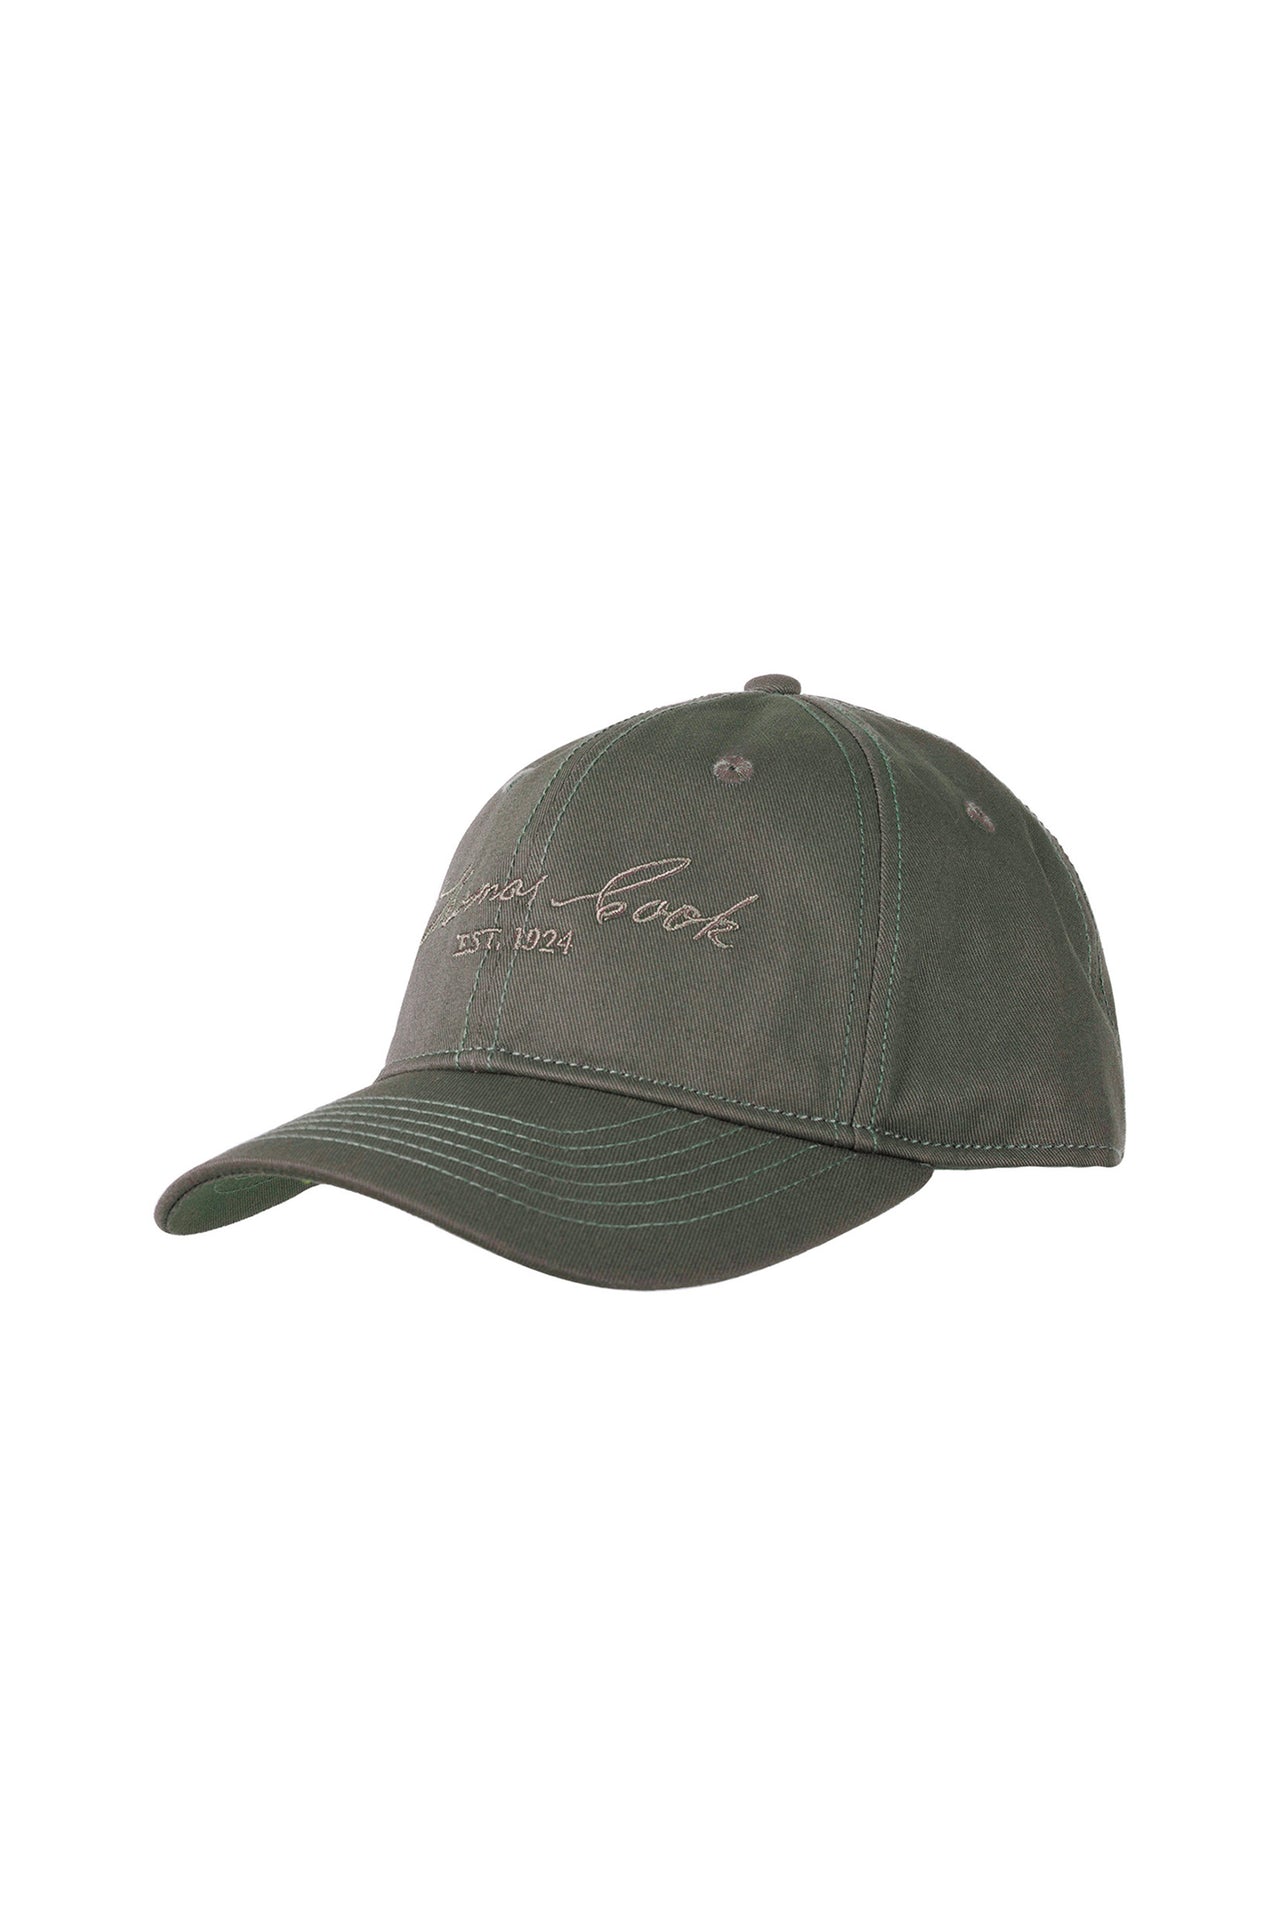 Thomas Cook Horseman Cap - The Trading Stables